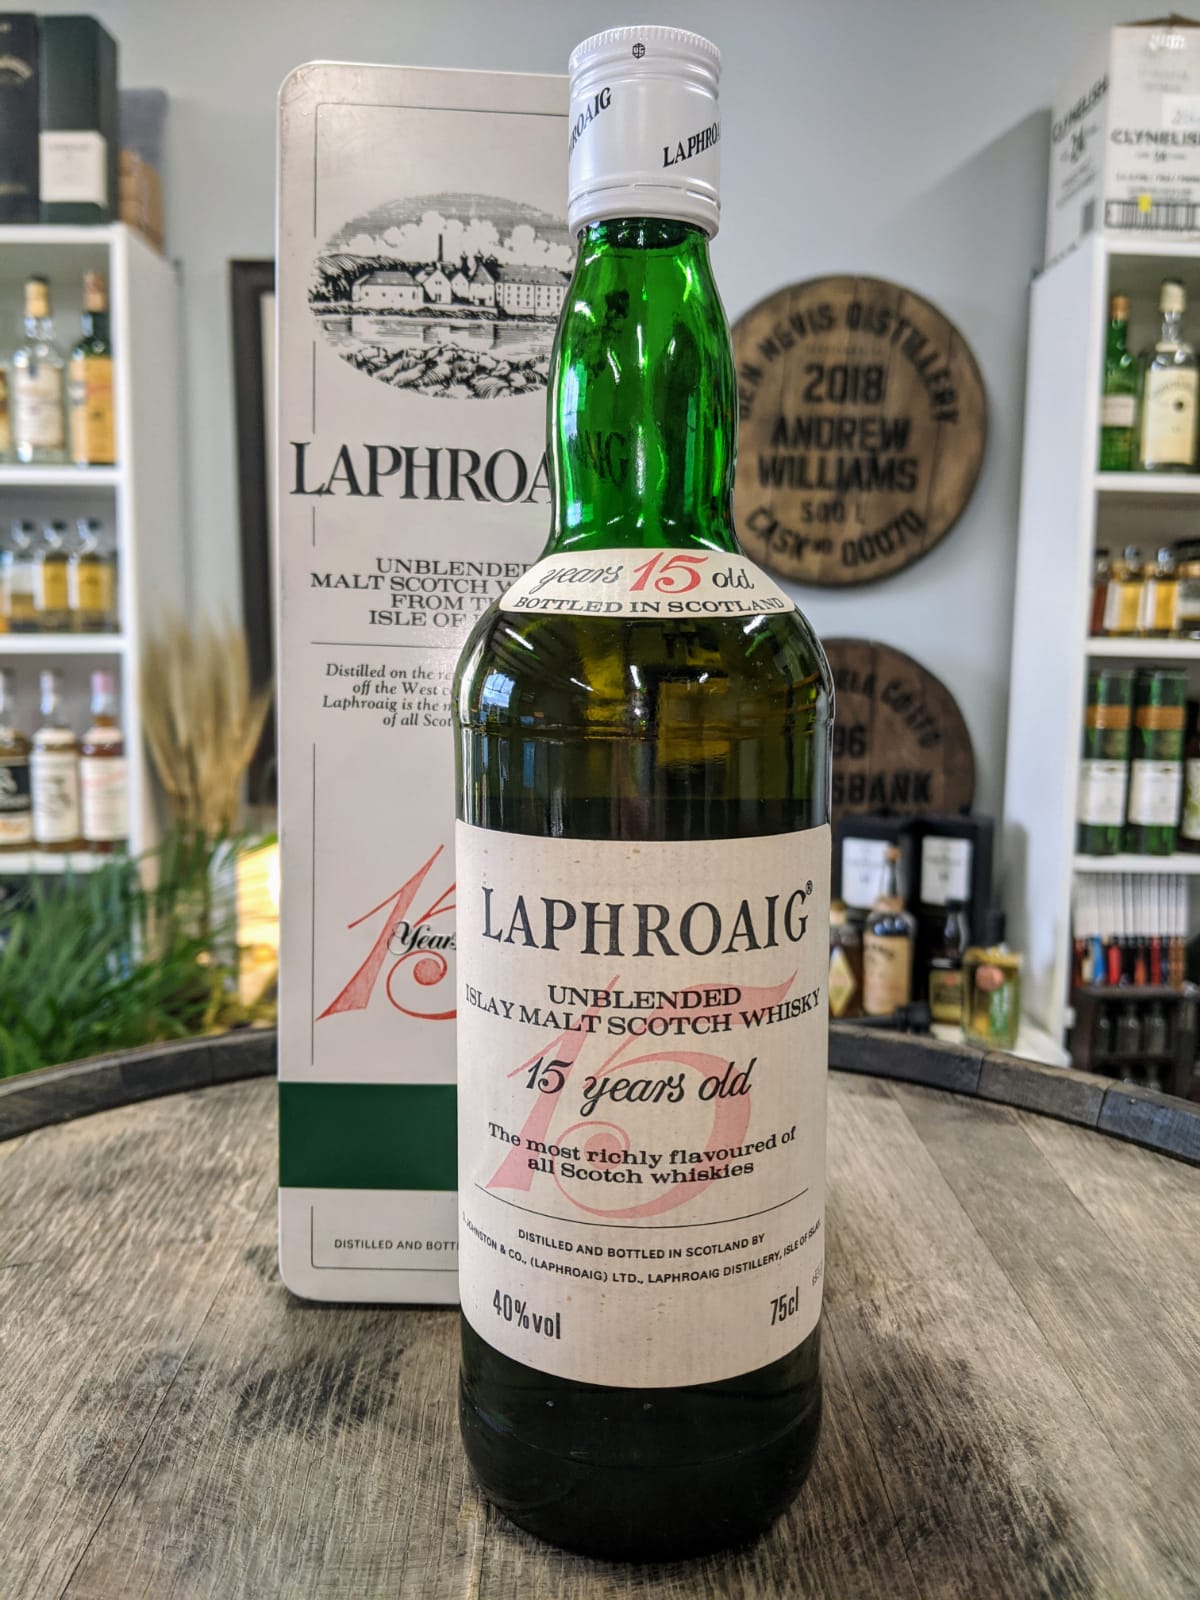 A Laphroaig bottle from the 1990s with red cursive lettering.